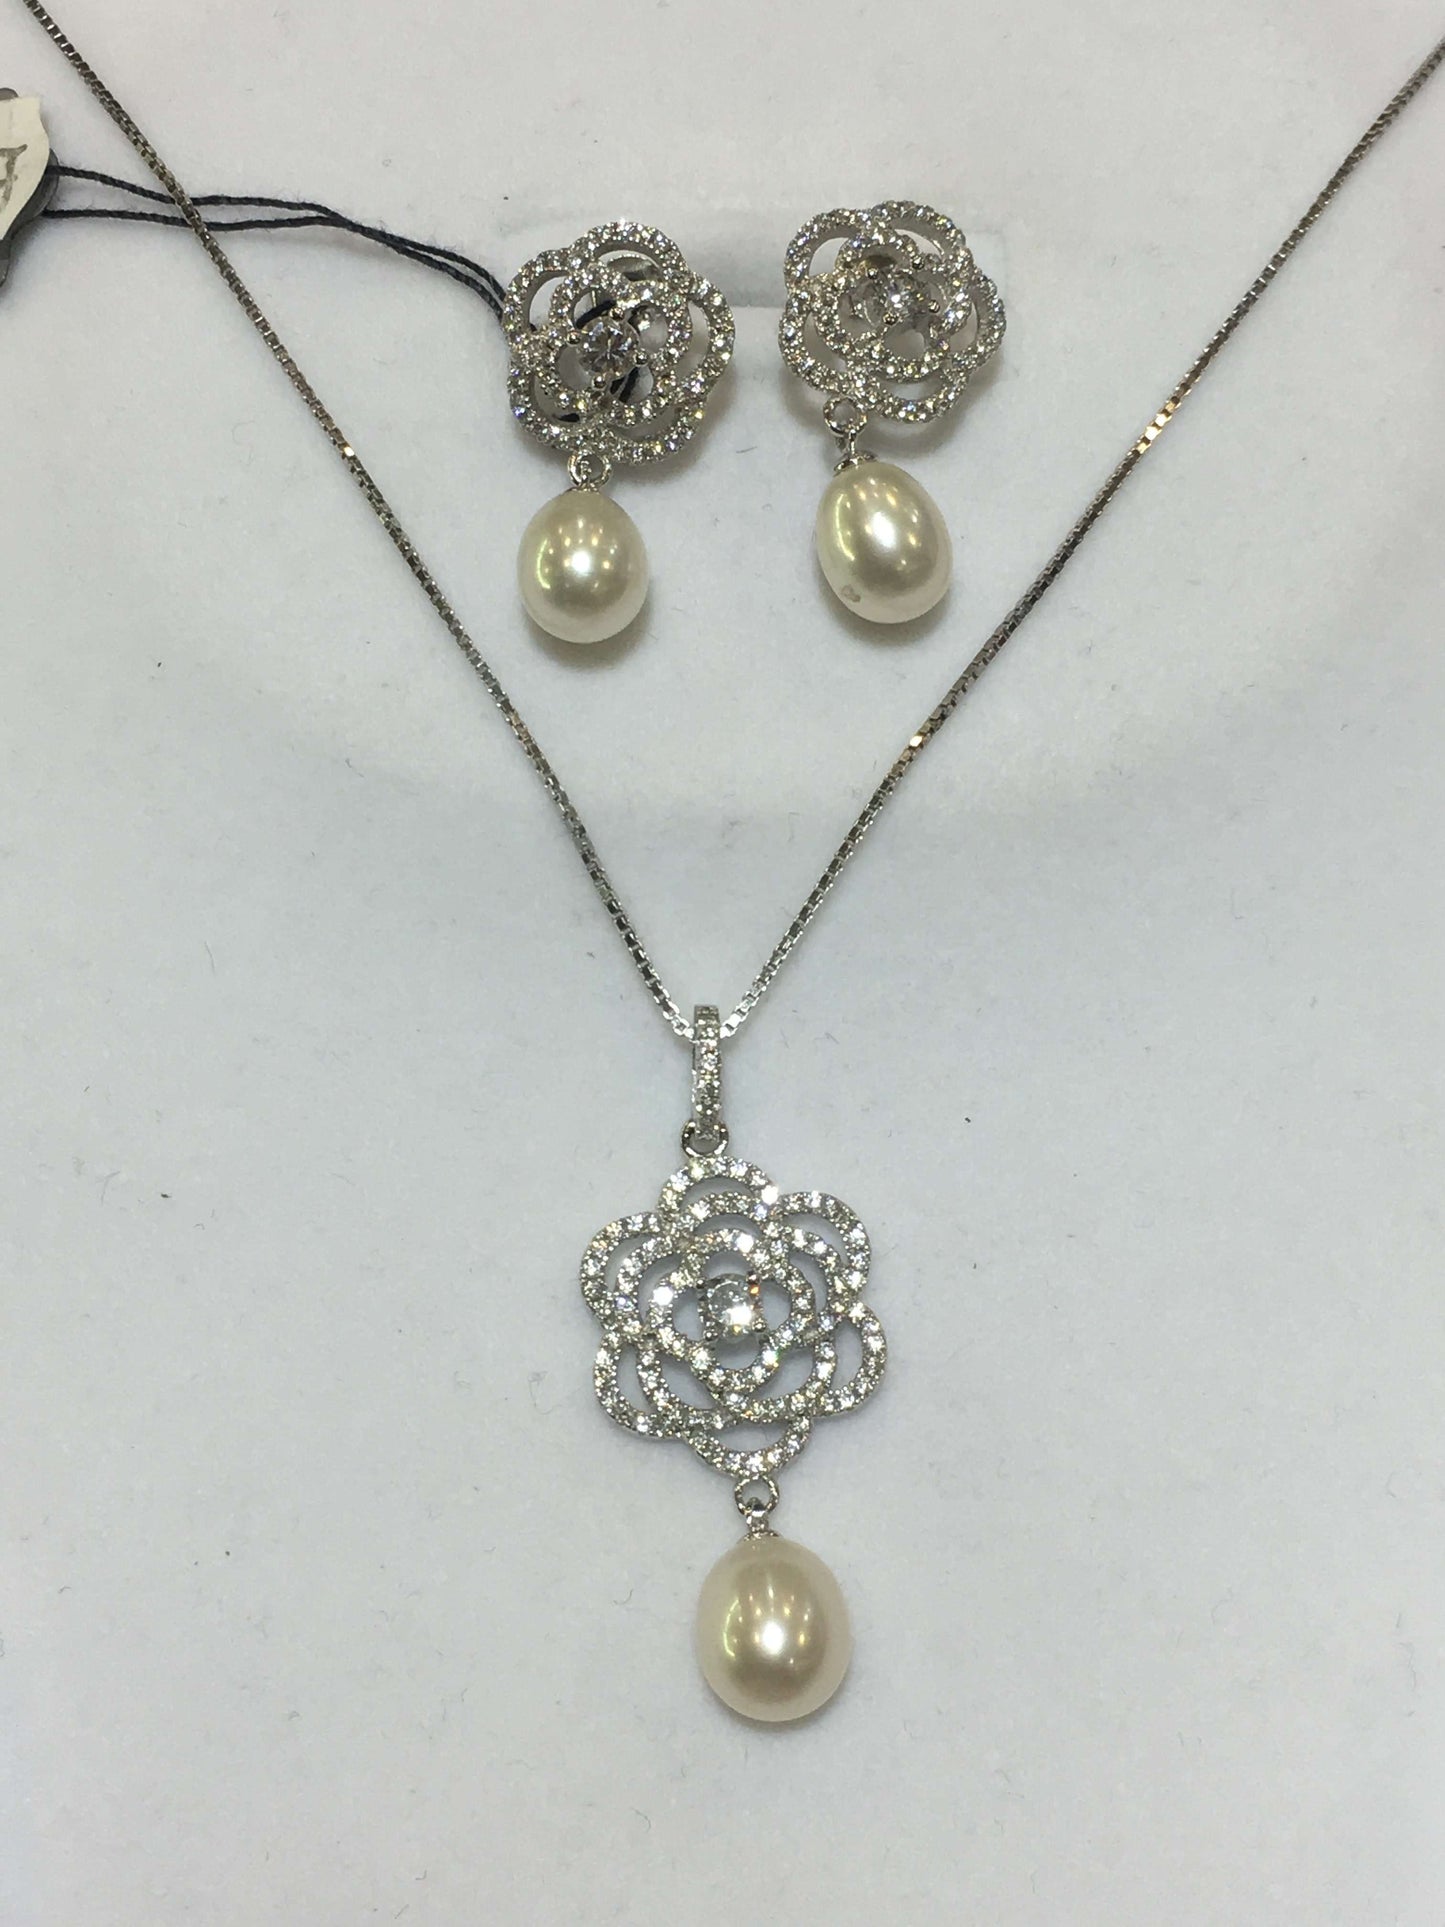 Italian Sterling Silver Necklace with Pearls